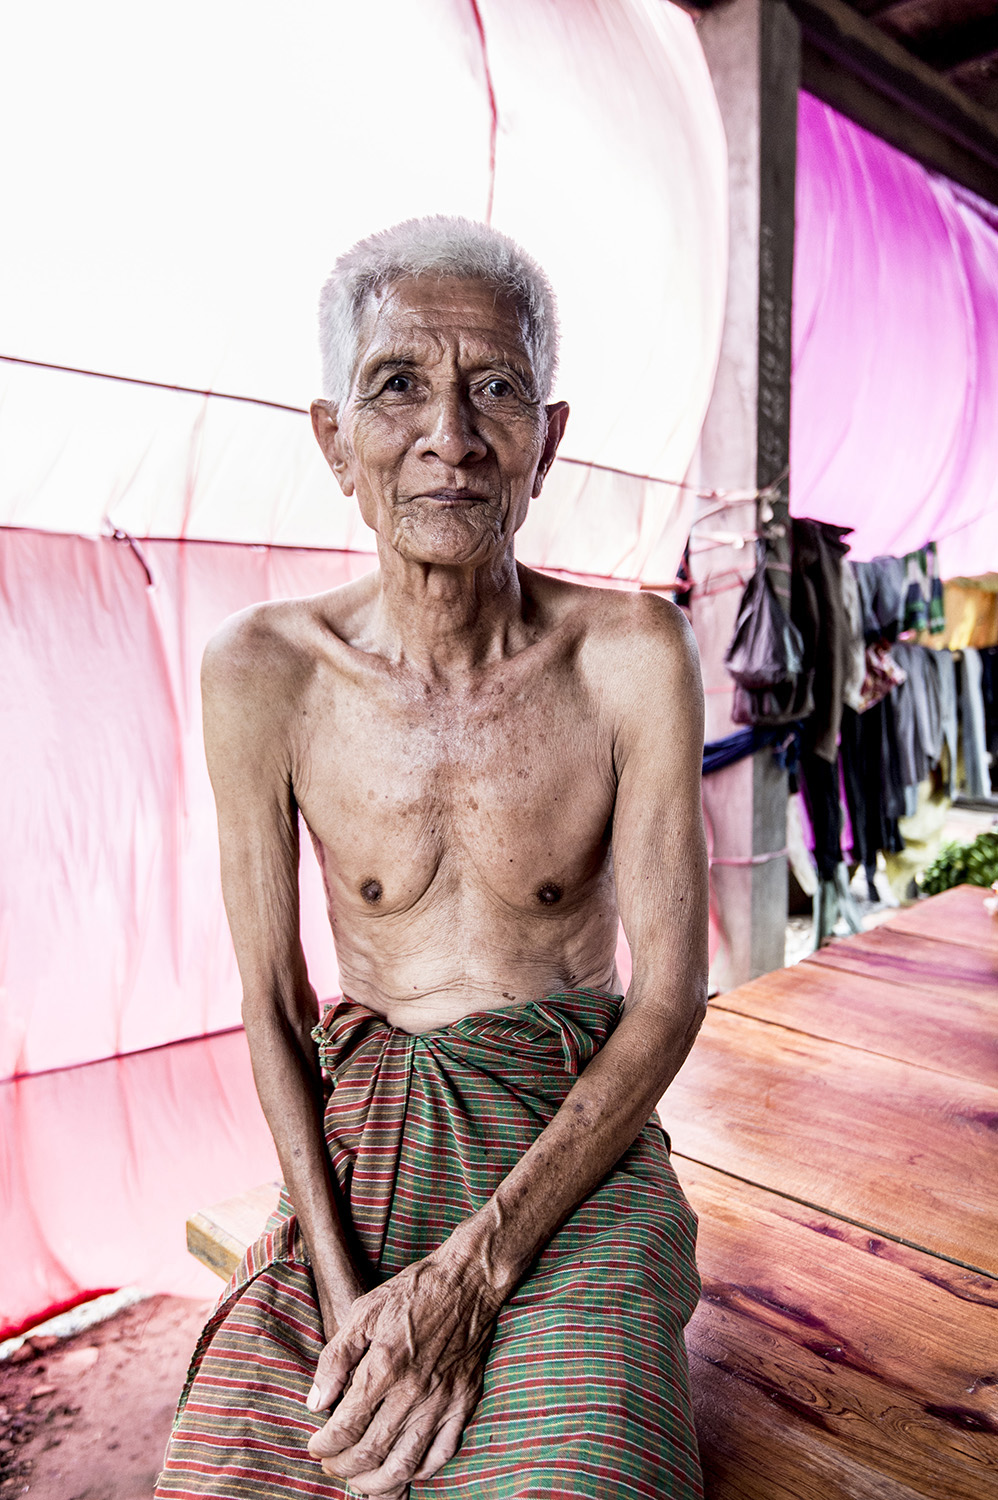 image of AARONTAIT COPYRIGHTED 2014 303 TRAVEL PHOTOGRAPHER ASIA REPORTAGE EDITORIAL STORY HUMANS LIFE EARTH TRAVELER EXPLORE CULTURE PEOPLE COUNTRY NATIONALITY DOCUMENTARY CAMBODIA VETEREN ELDER MAN PINK PORT